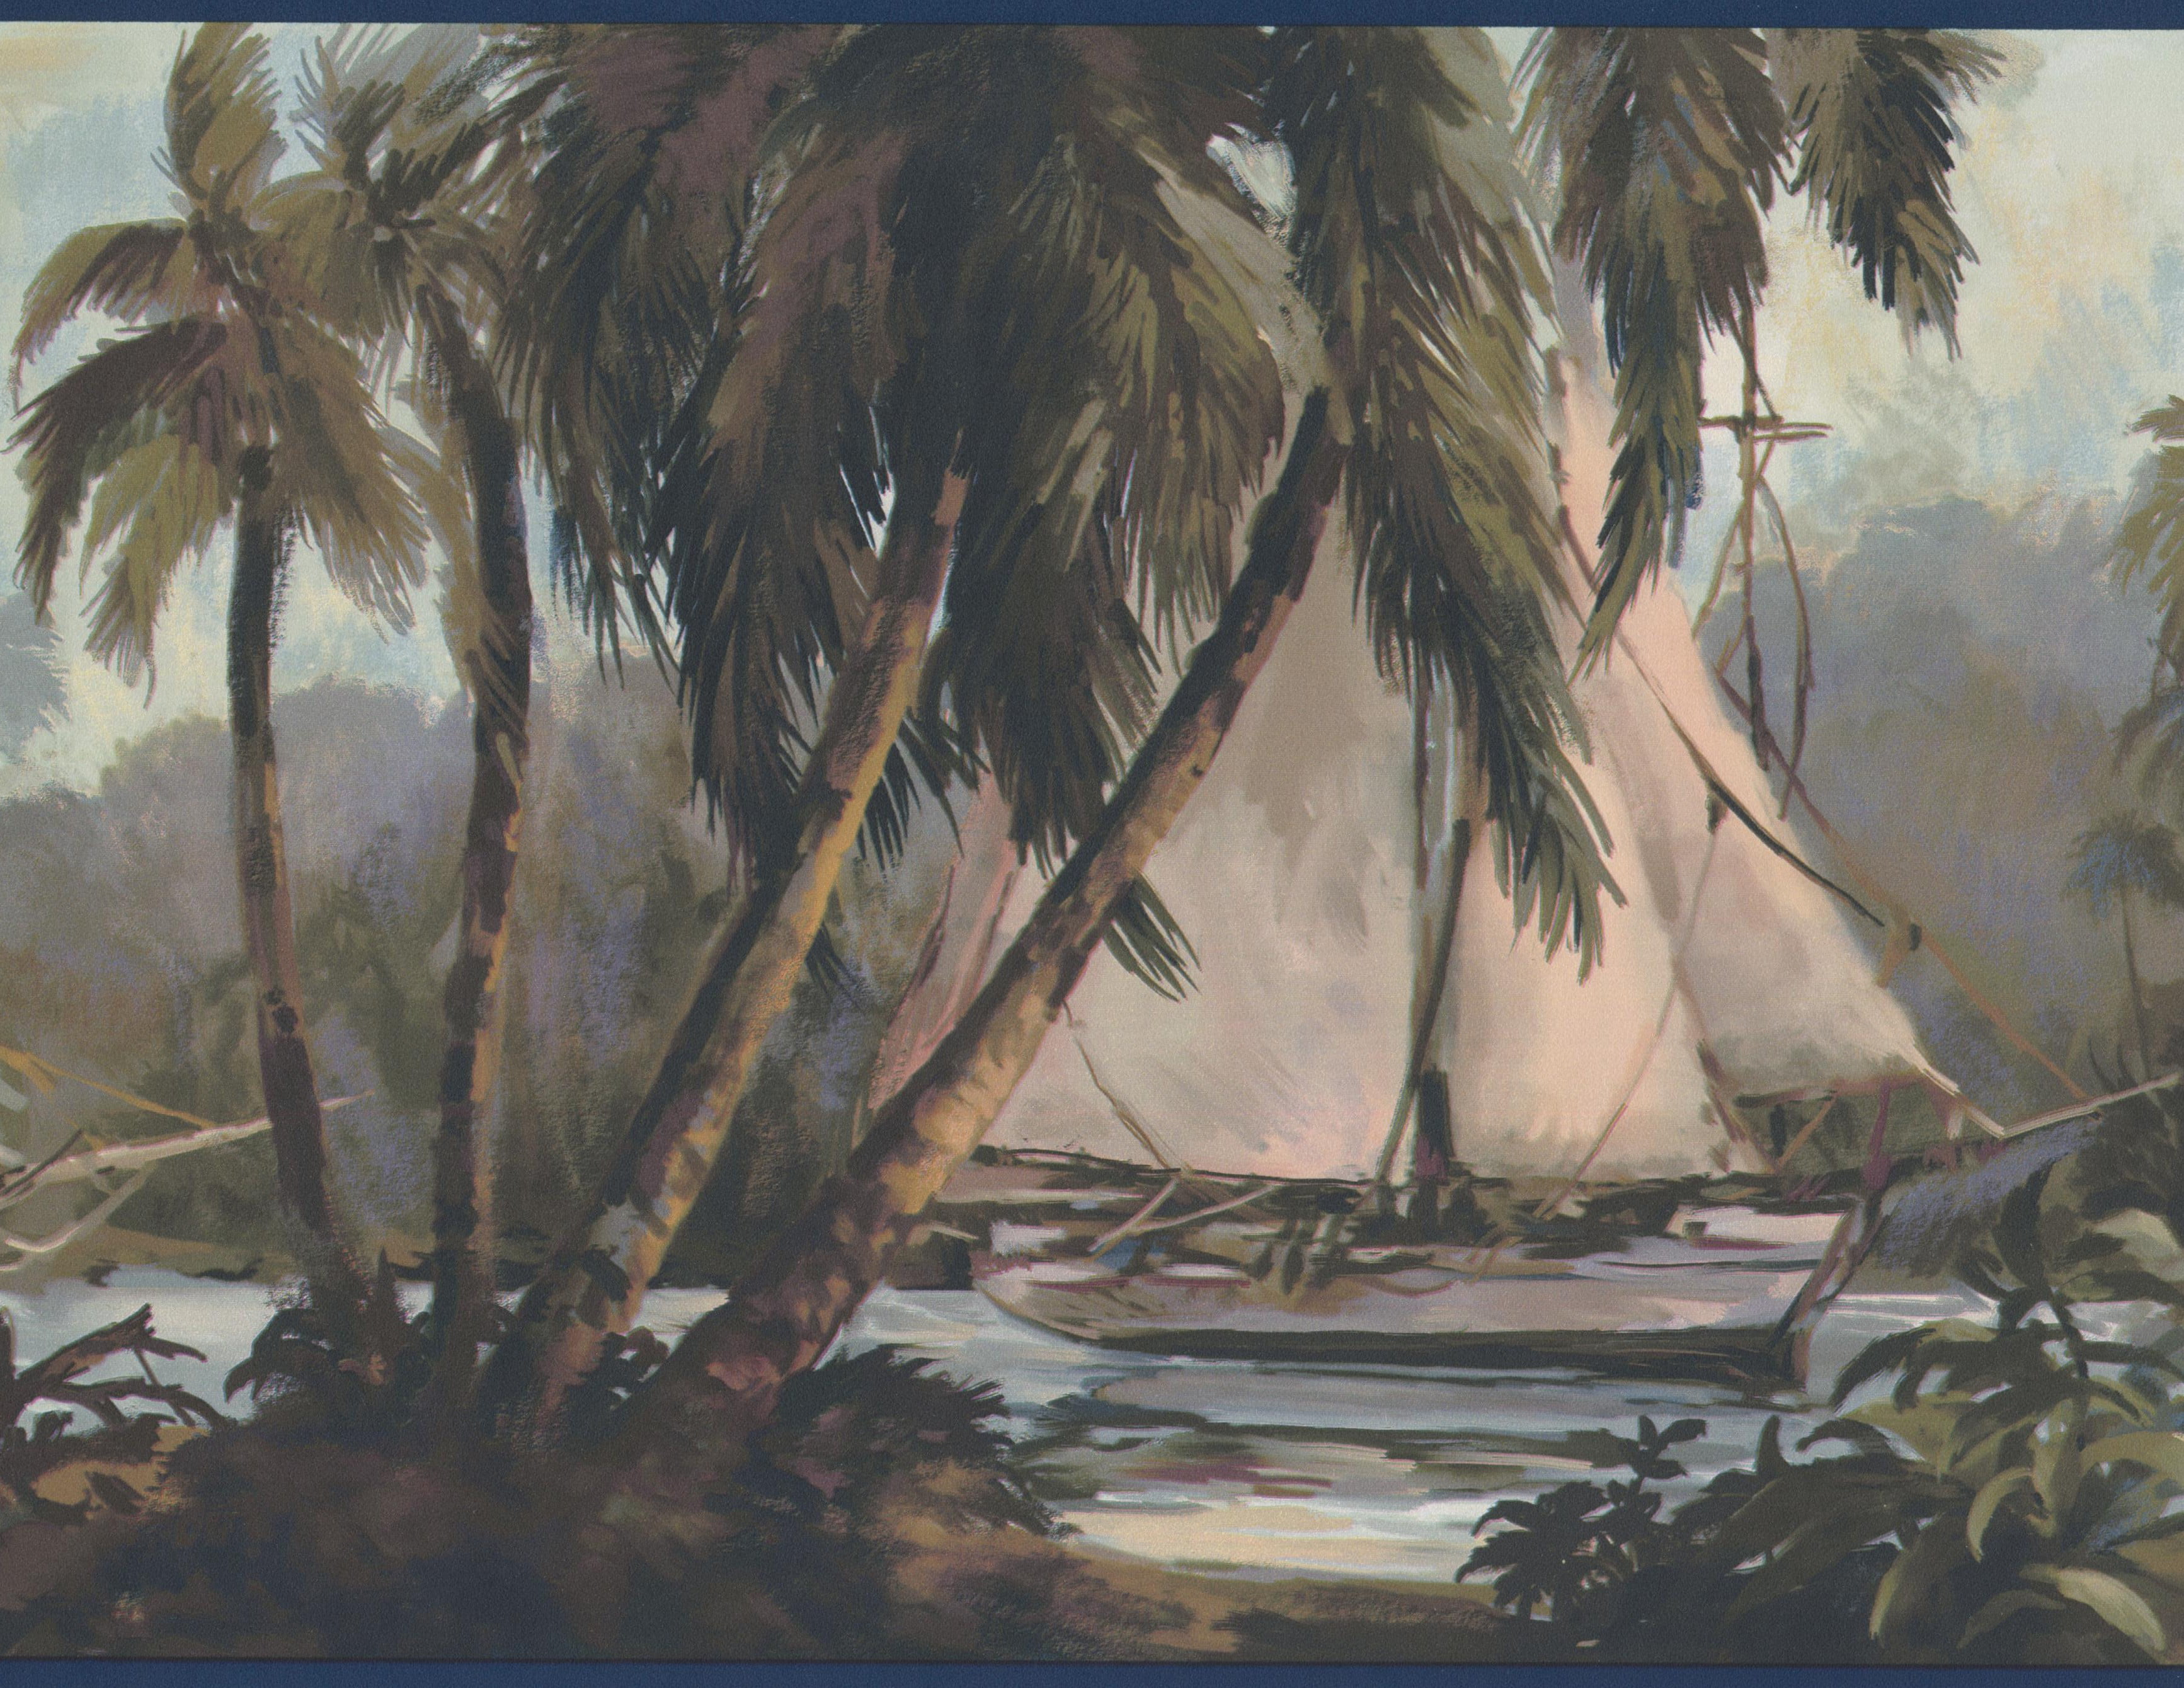 Wallpaper Border - Sail Boats in the Jungle Palm Trees Vintage Wall ...